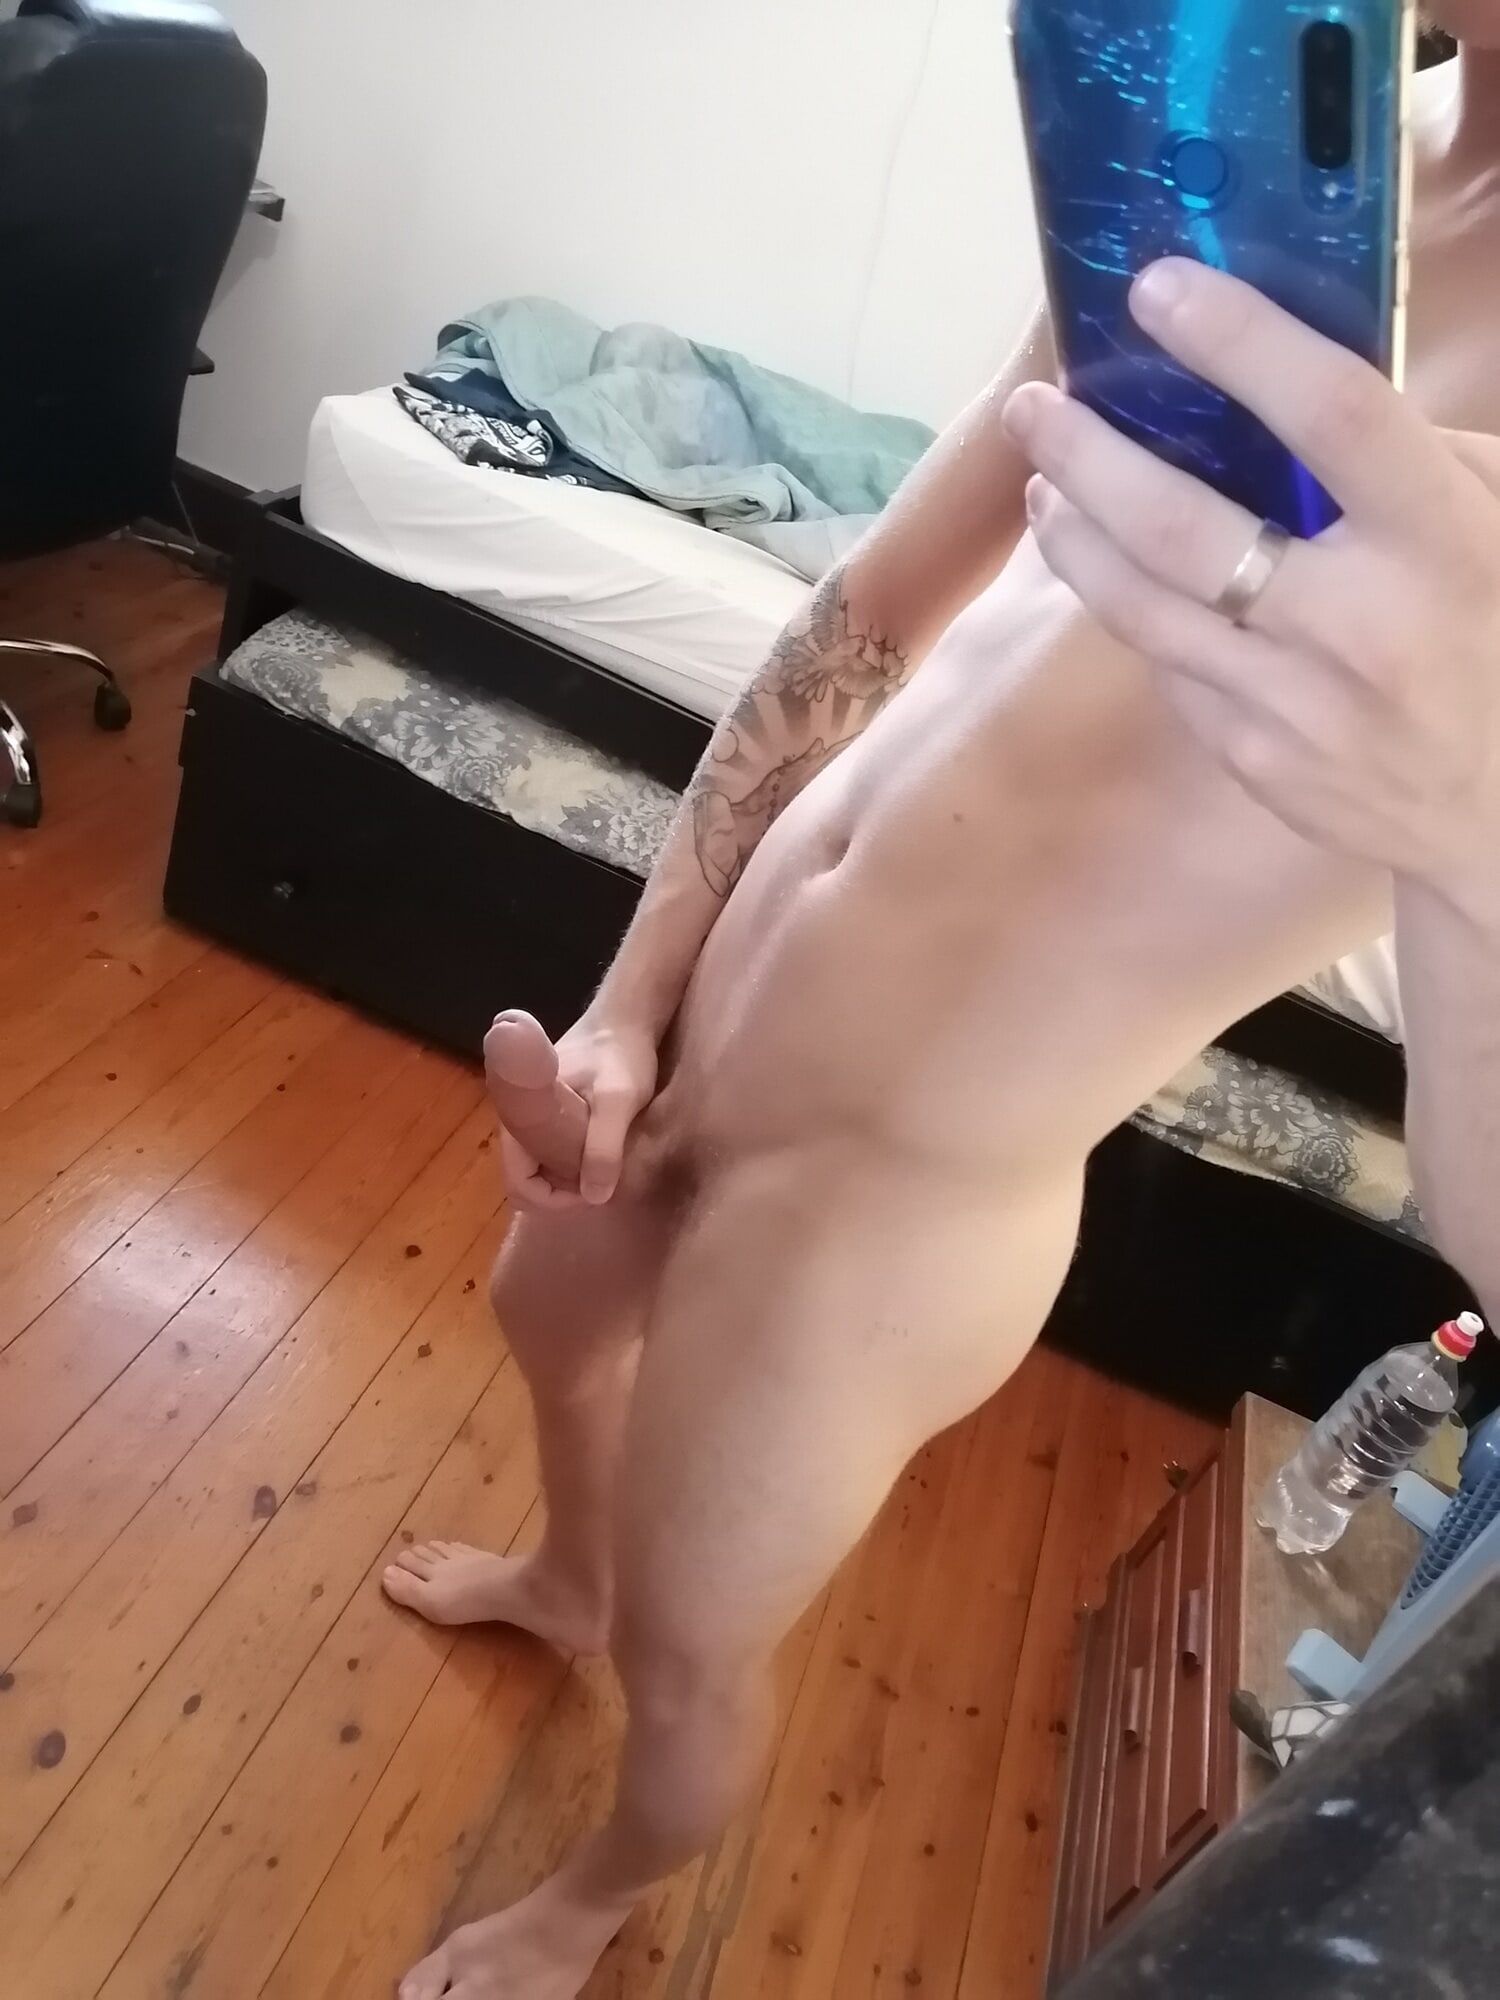 Sexy Bisexual Twink loves showing off his body